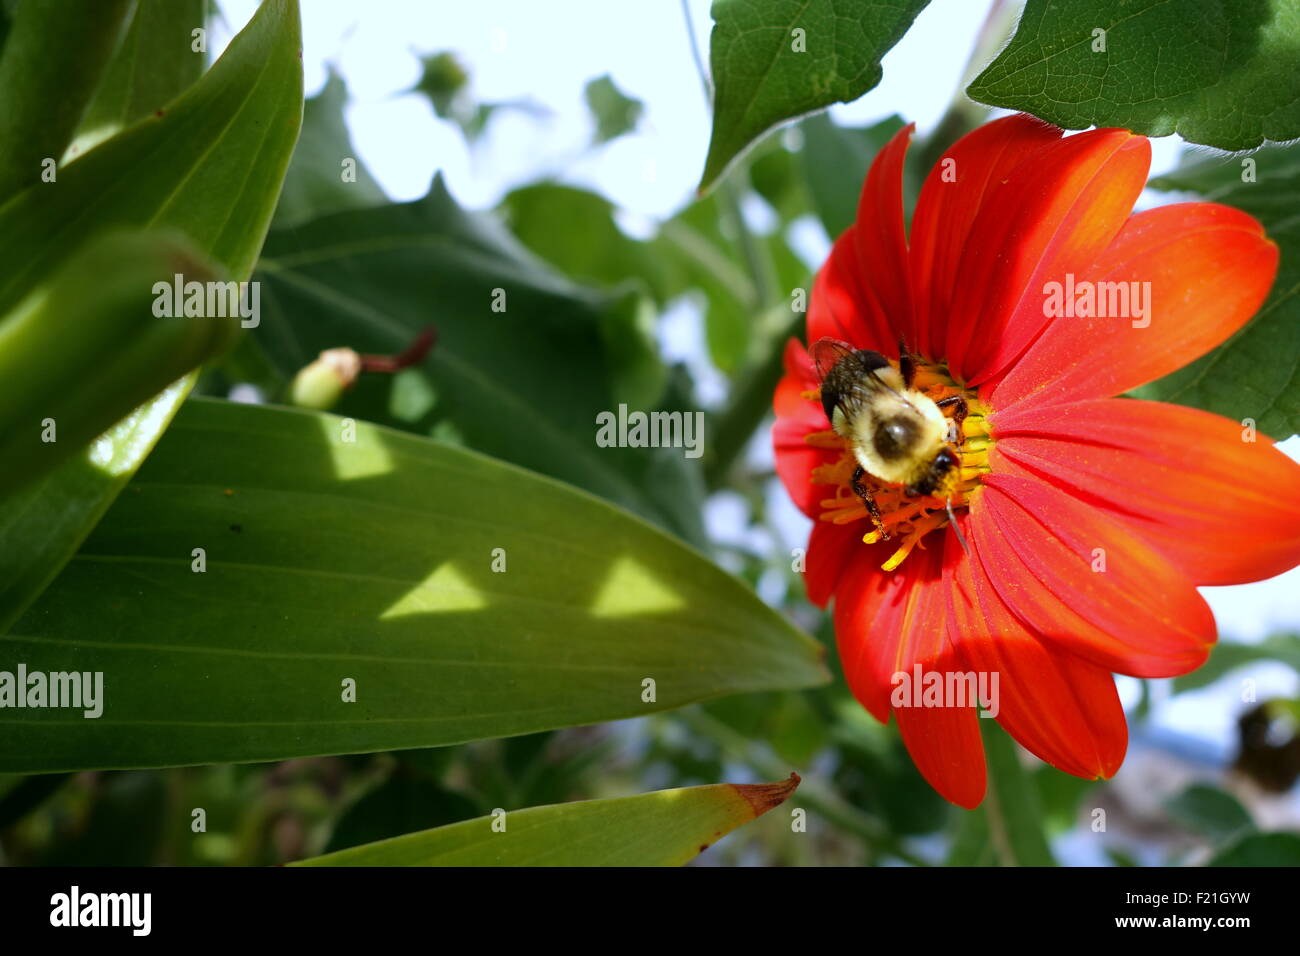 Bee pollinating Mexican sunflower Stock Photo